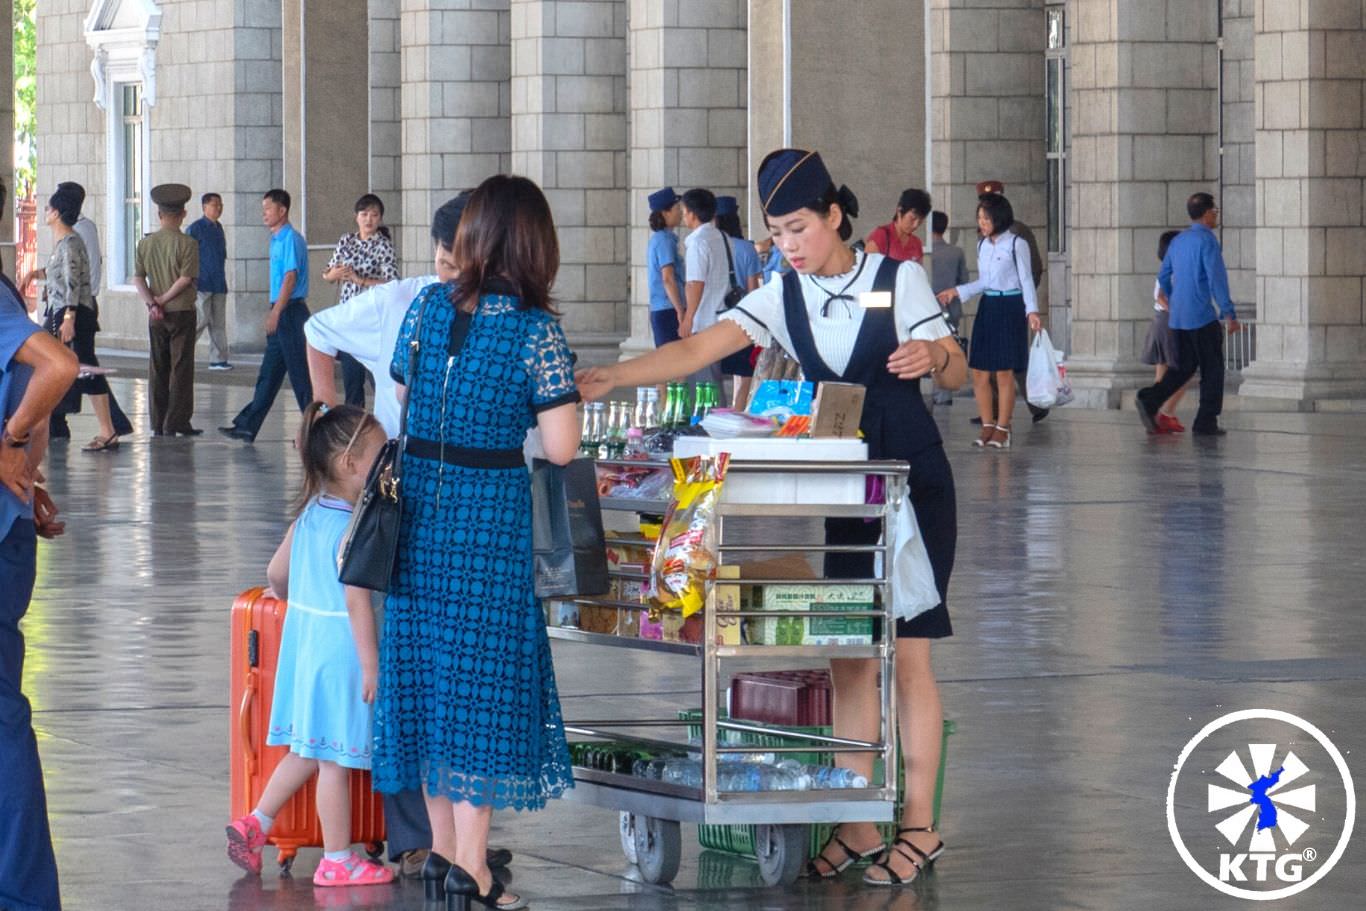 Lady selling snacks at the Pyongyang train station, North Korea (DPRK) before we take the train to China. Picture taken by KTG®